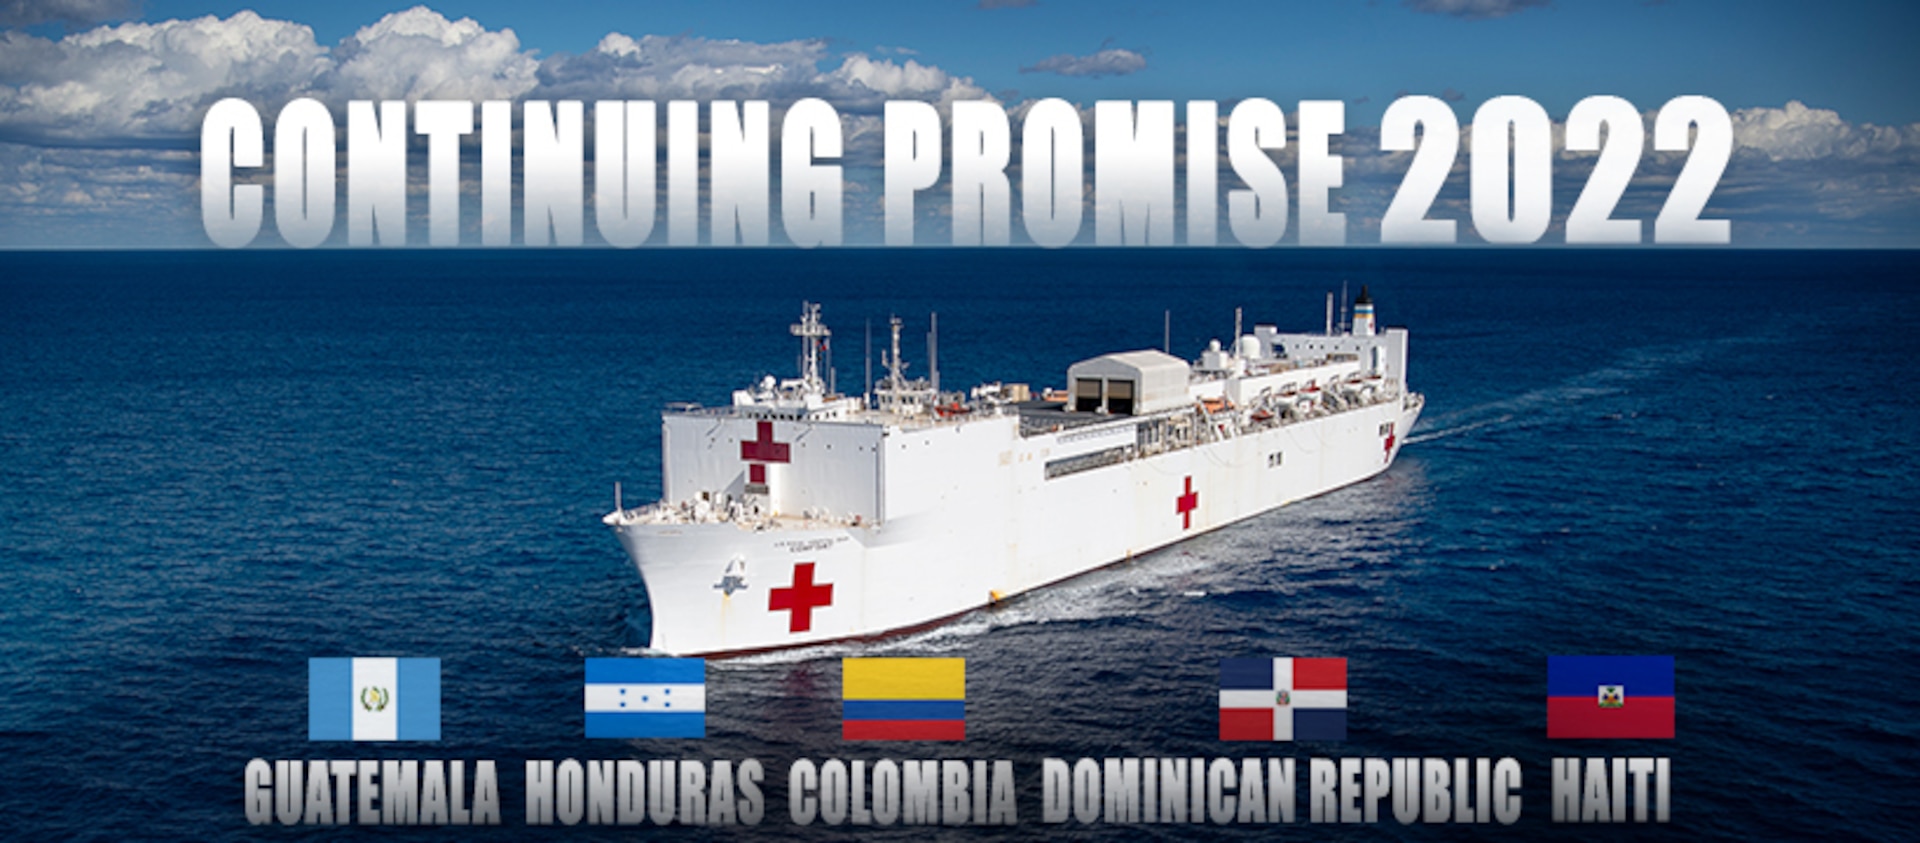 A graphic depicting hospital ship USNS Comfort (T-AH 20) and the flags and names of all the countries the ship visited during Continuing Promise 2022. Comfort is deployed to U.S. 4th Fleet in support of Continuing Promise 2022, a humanitarian assistance and goodwill mission conducting direct medical care, expeditionary veterinary care, and subject matter expert exchanges with five partner nations in the Caribbean, Central and South America. (U.S. Navy graphic by Mass Communication Specialist 2nd Class Ethan J. Soto)